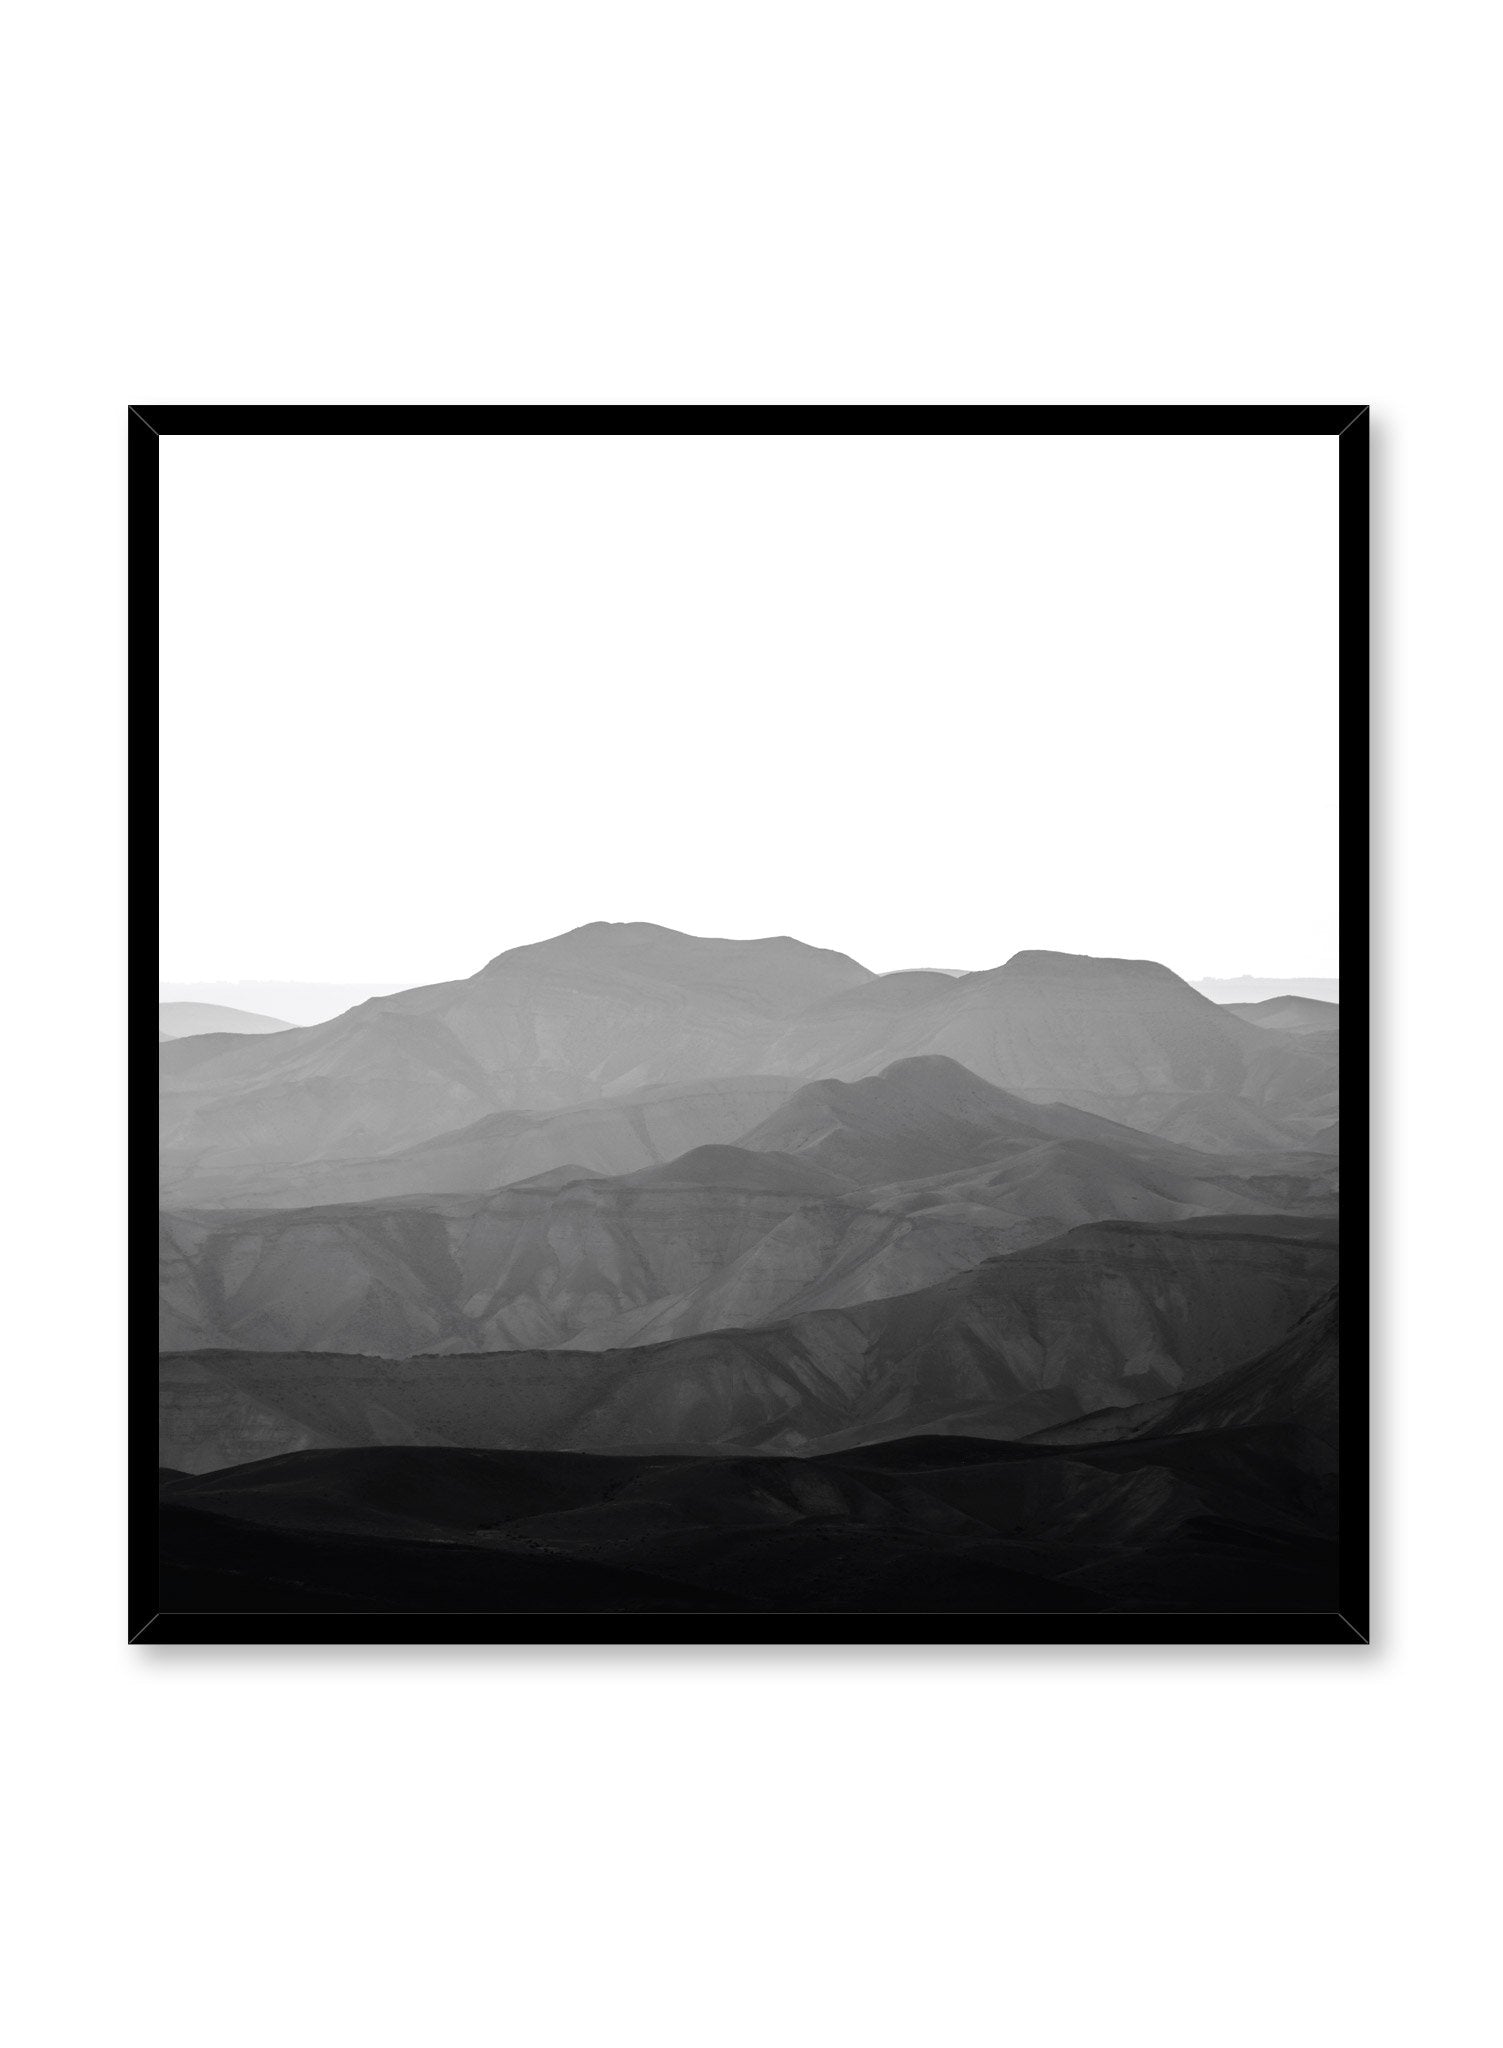 Modern minimalist poster by Opposite Wall with black and white landscape photography of mountain range in square format